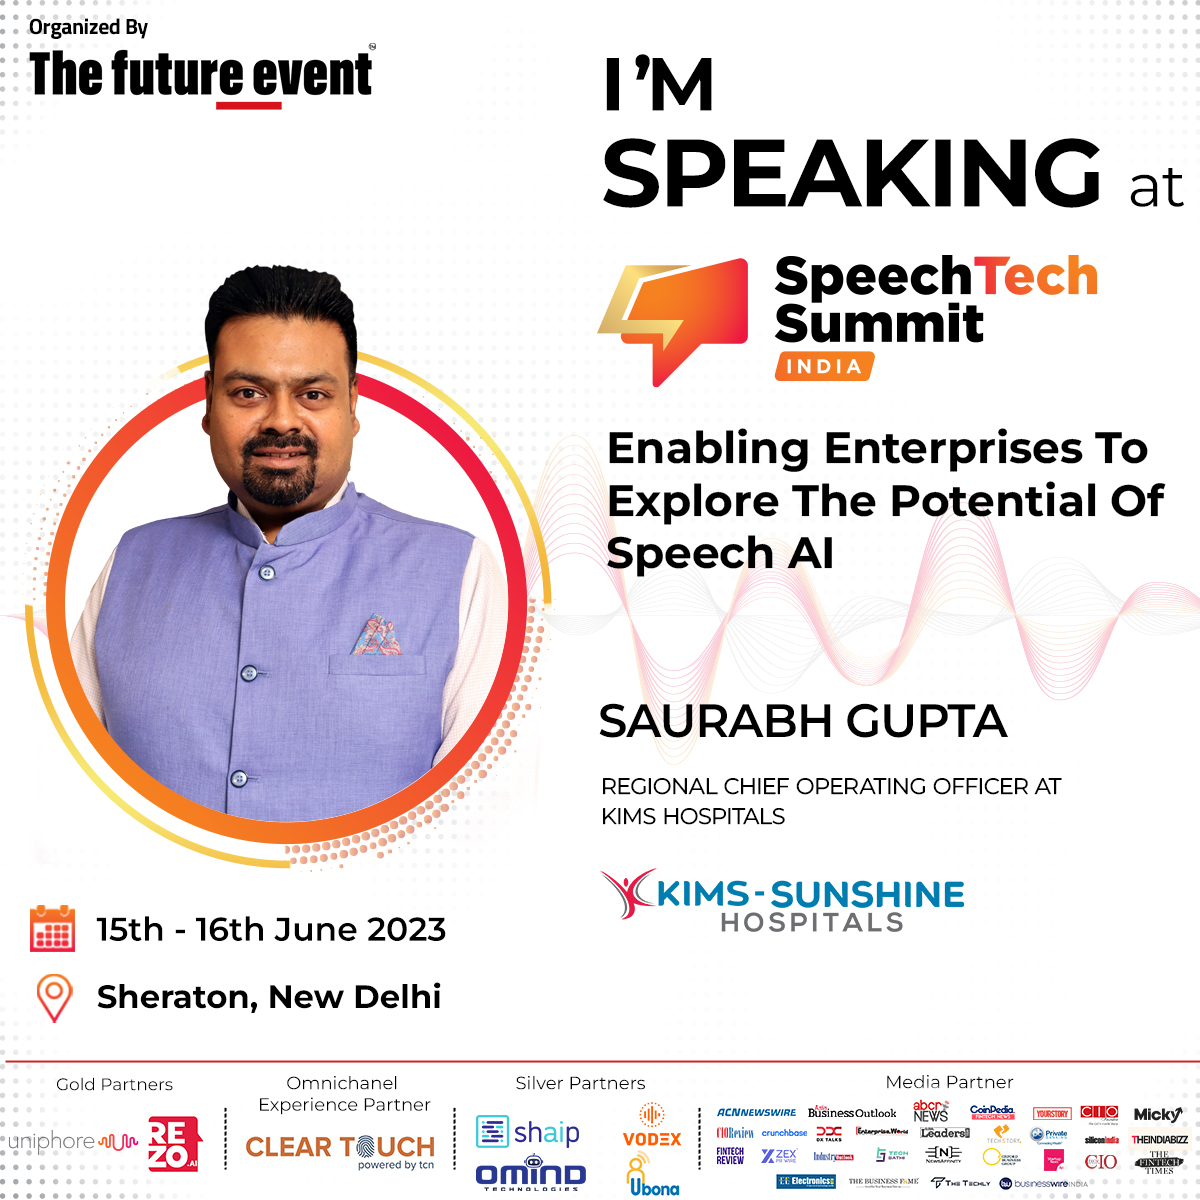 I’m Speaking at India’s first and only conference and exhibition on Speech Technology, Enabling Enterprises to explore the potential of Speech AI. 
Join me on 15- 16th June, at Sheraton, Delhi for 3rd SpeechTech Summit India
#thefutureevent
#speechtechsummit #stsindia #sts2023